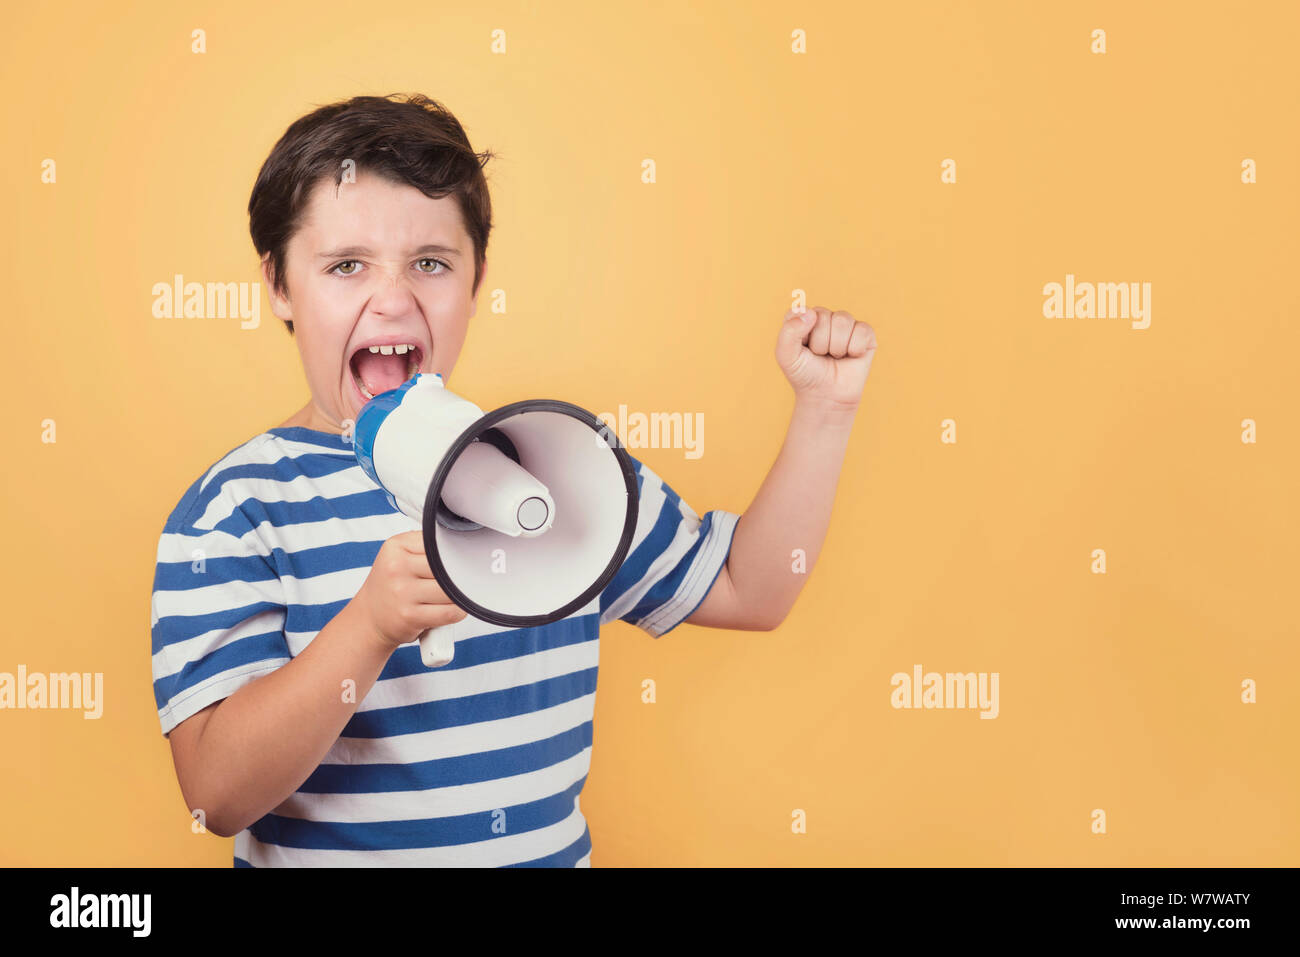 screaming child with megaphone against yellow background Stock Photo